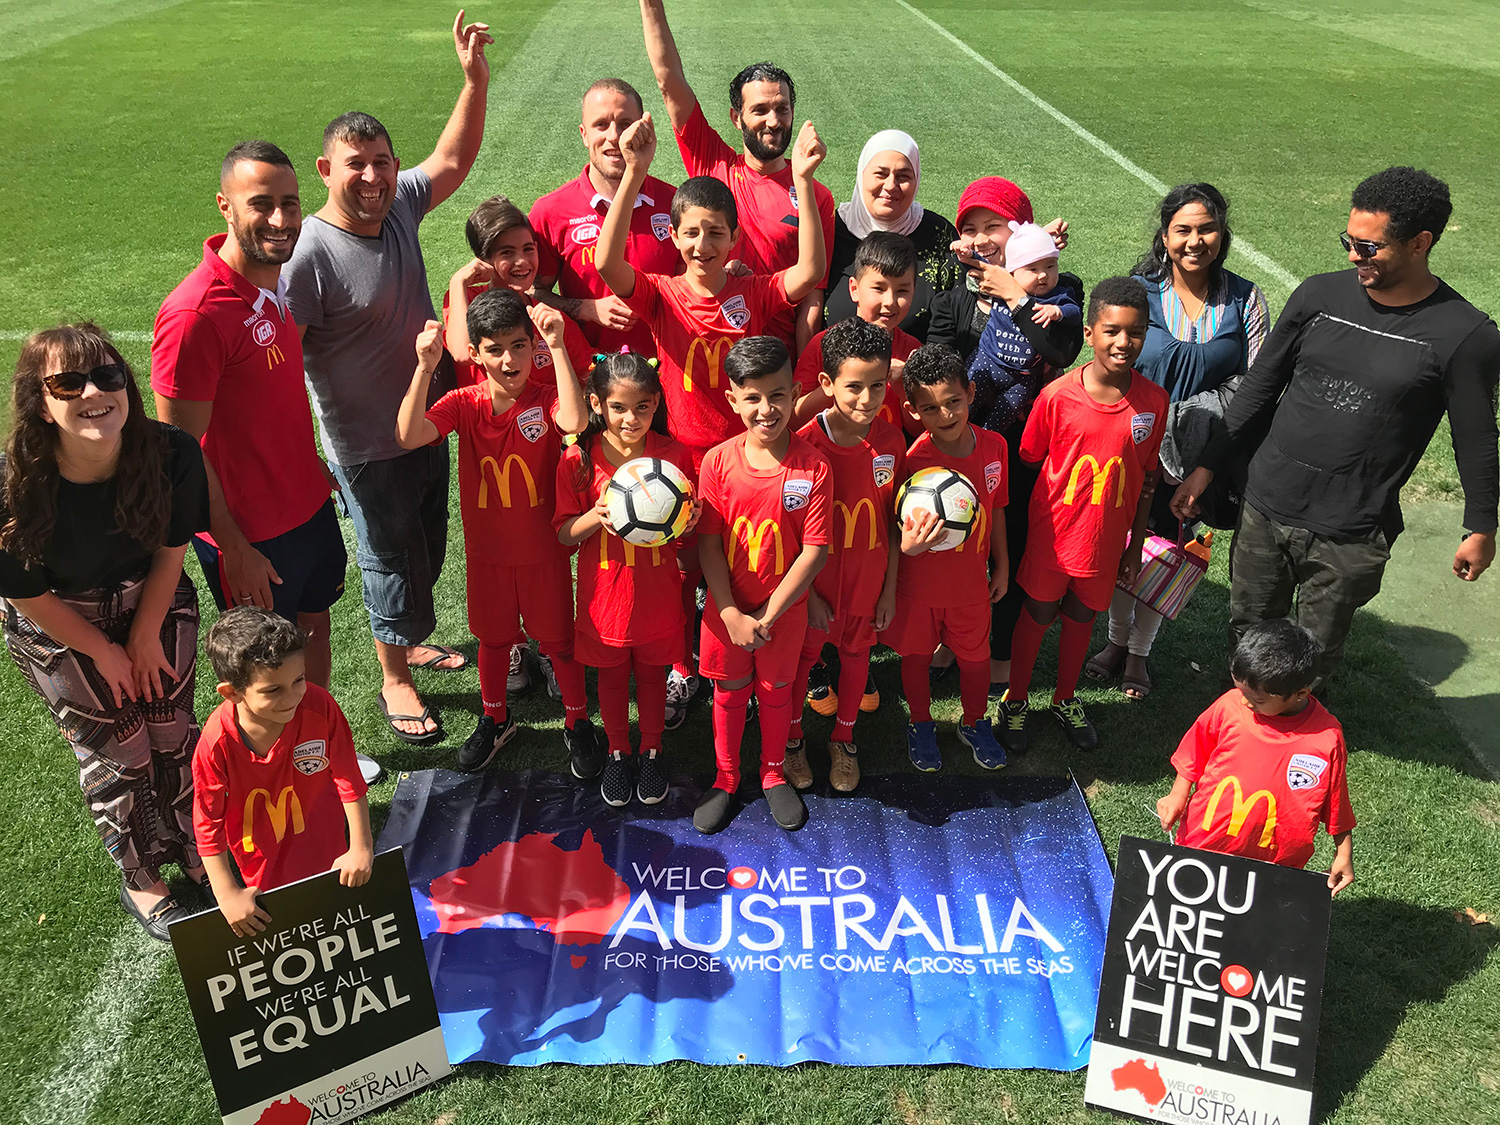 Welcome to Australia teams up with Adelaide United for Harmony Round